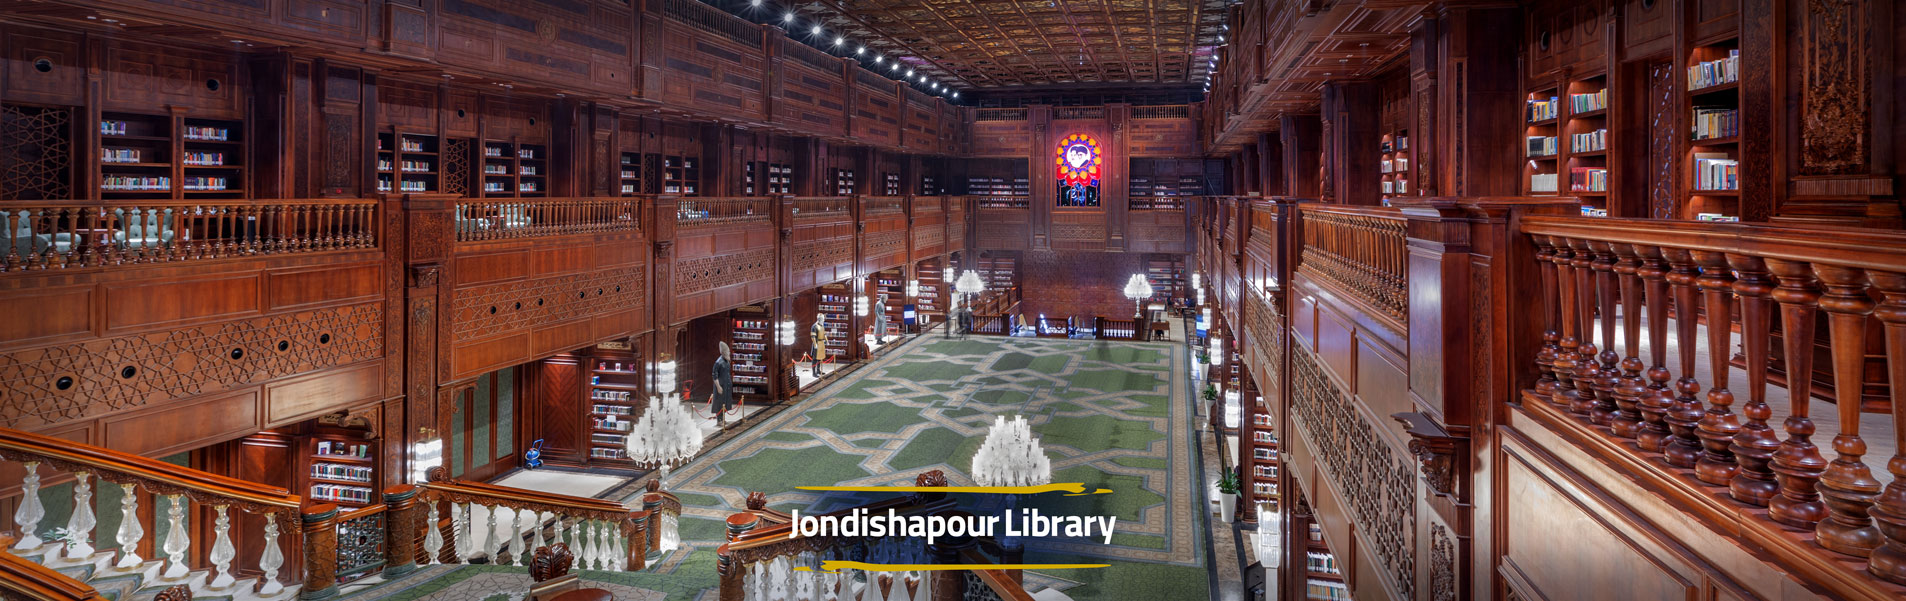 Jondishapour Library